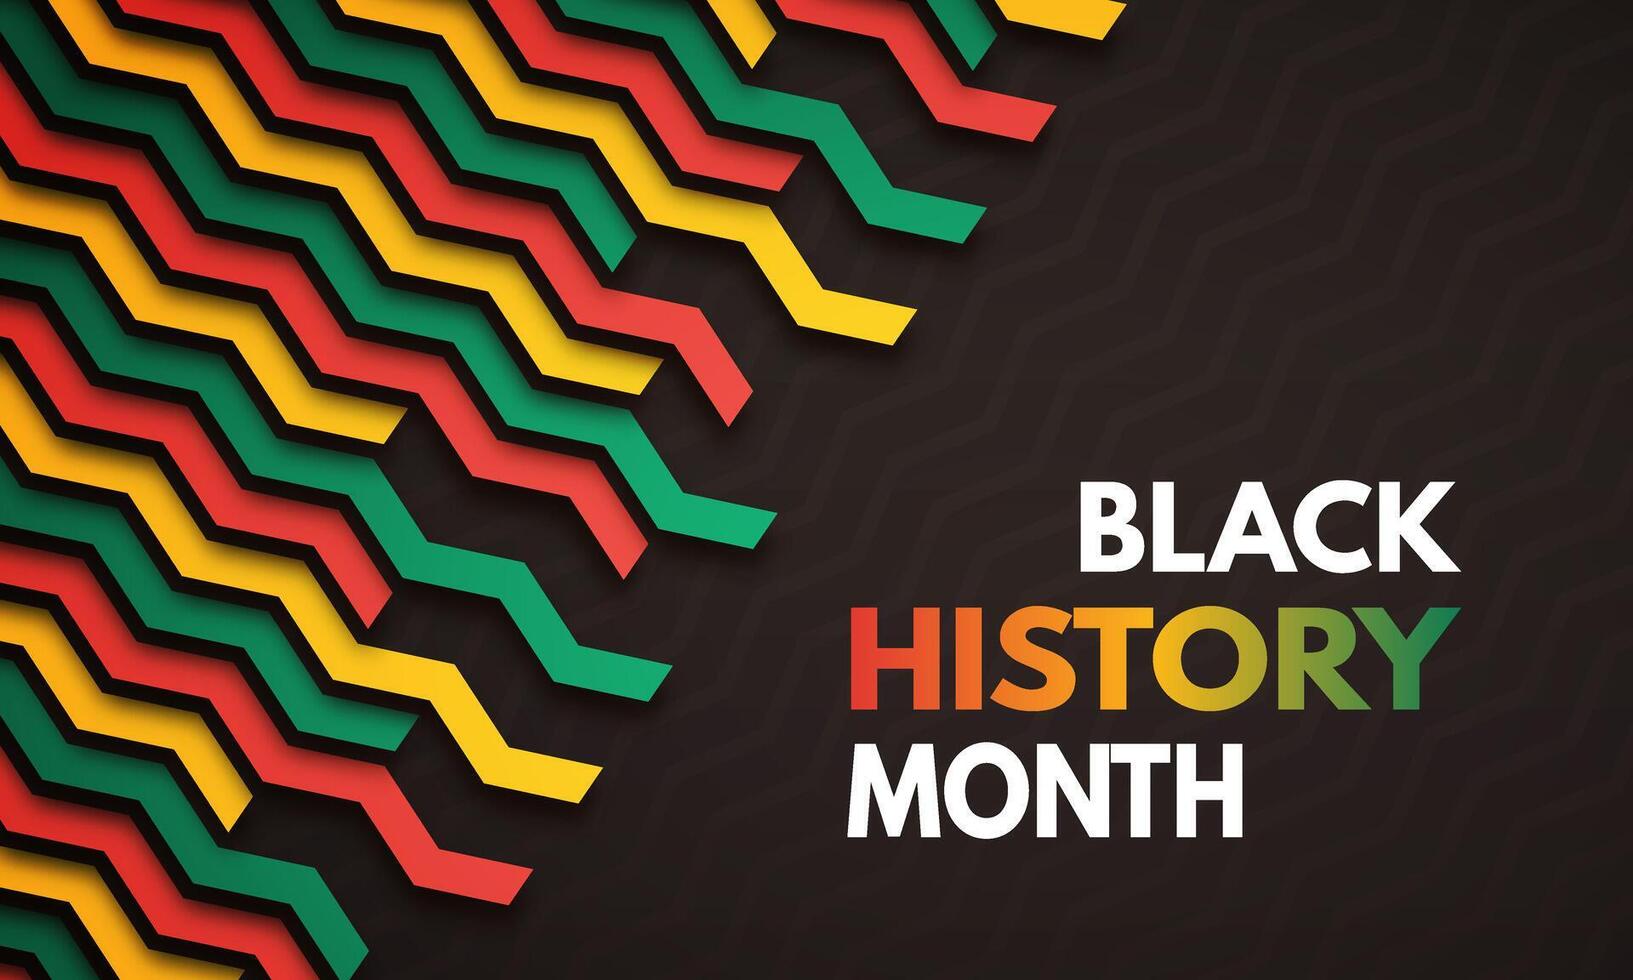 Black history month. Banner with zigzag in red, gold and green colors of the Pan-African flag. African American history month celebration concept for flyer, card and poster. Vector illustration